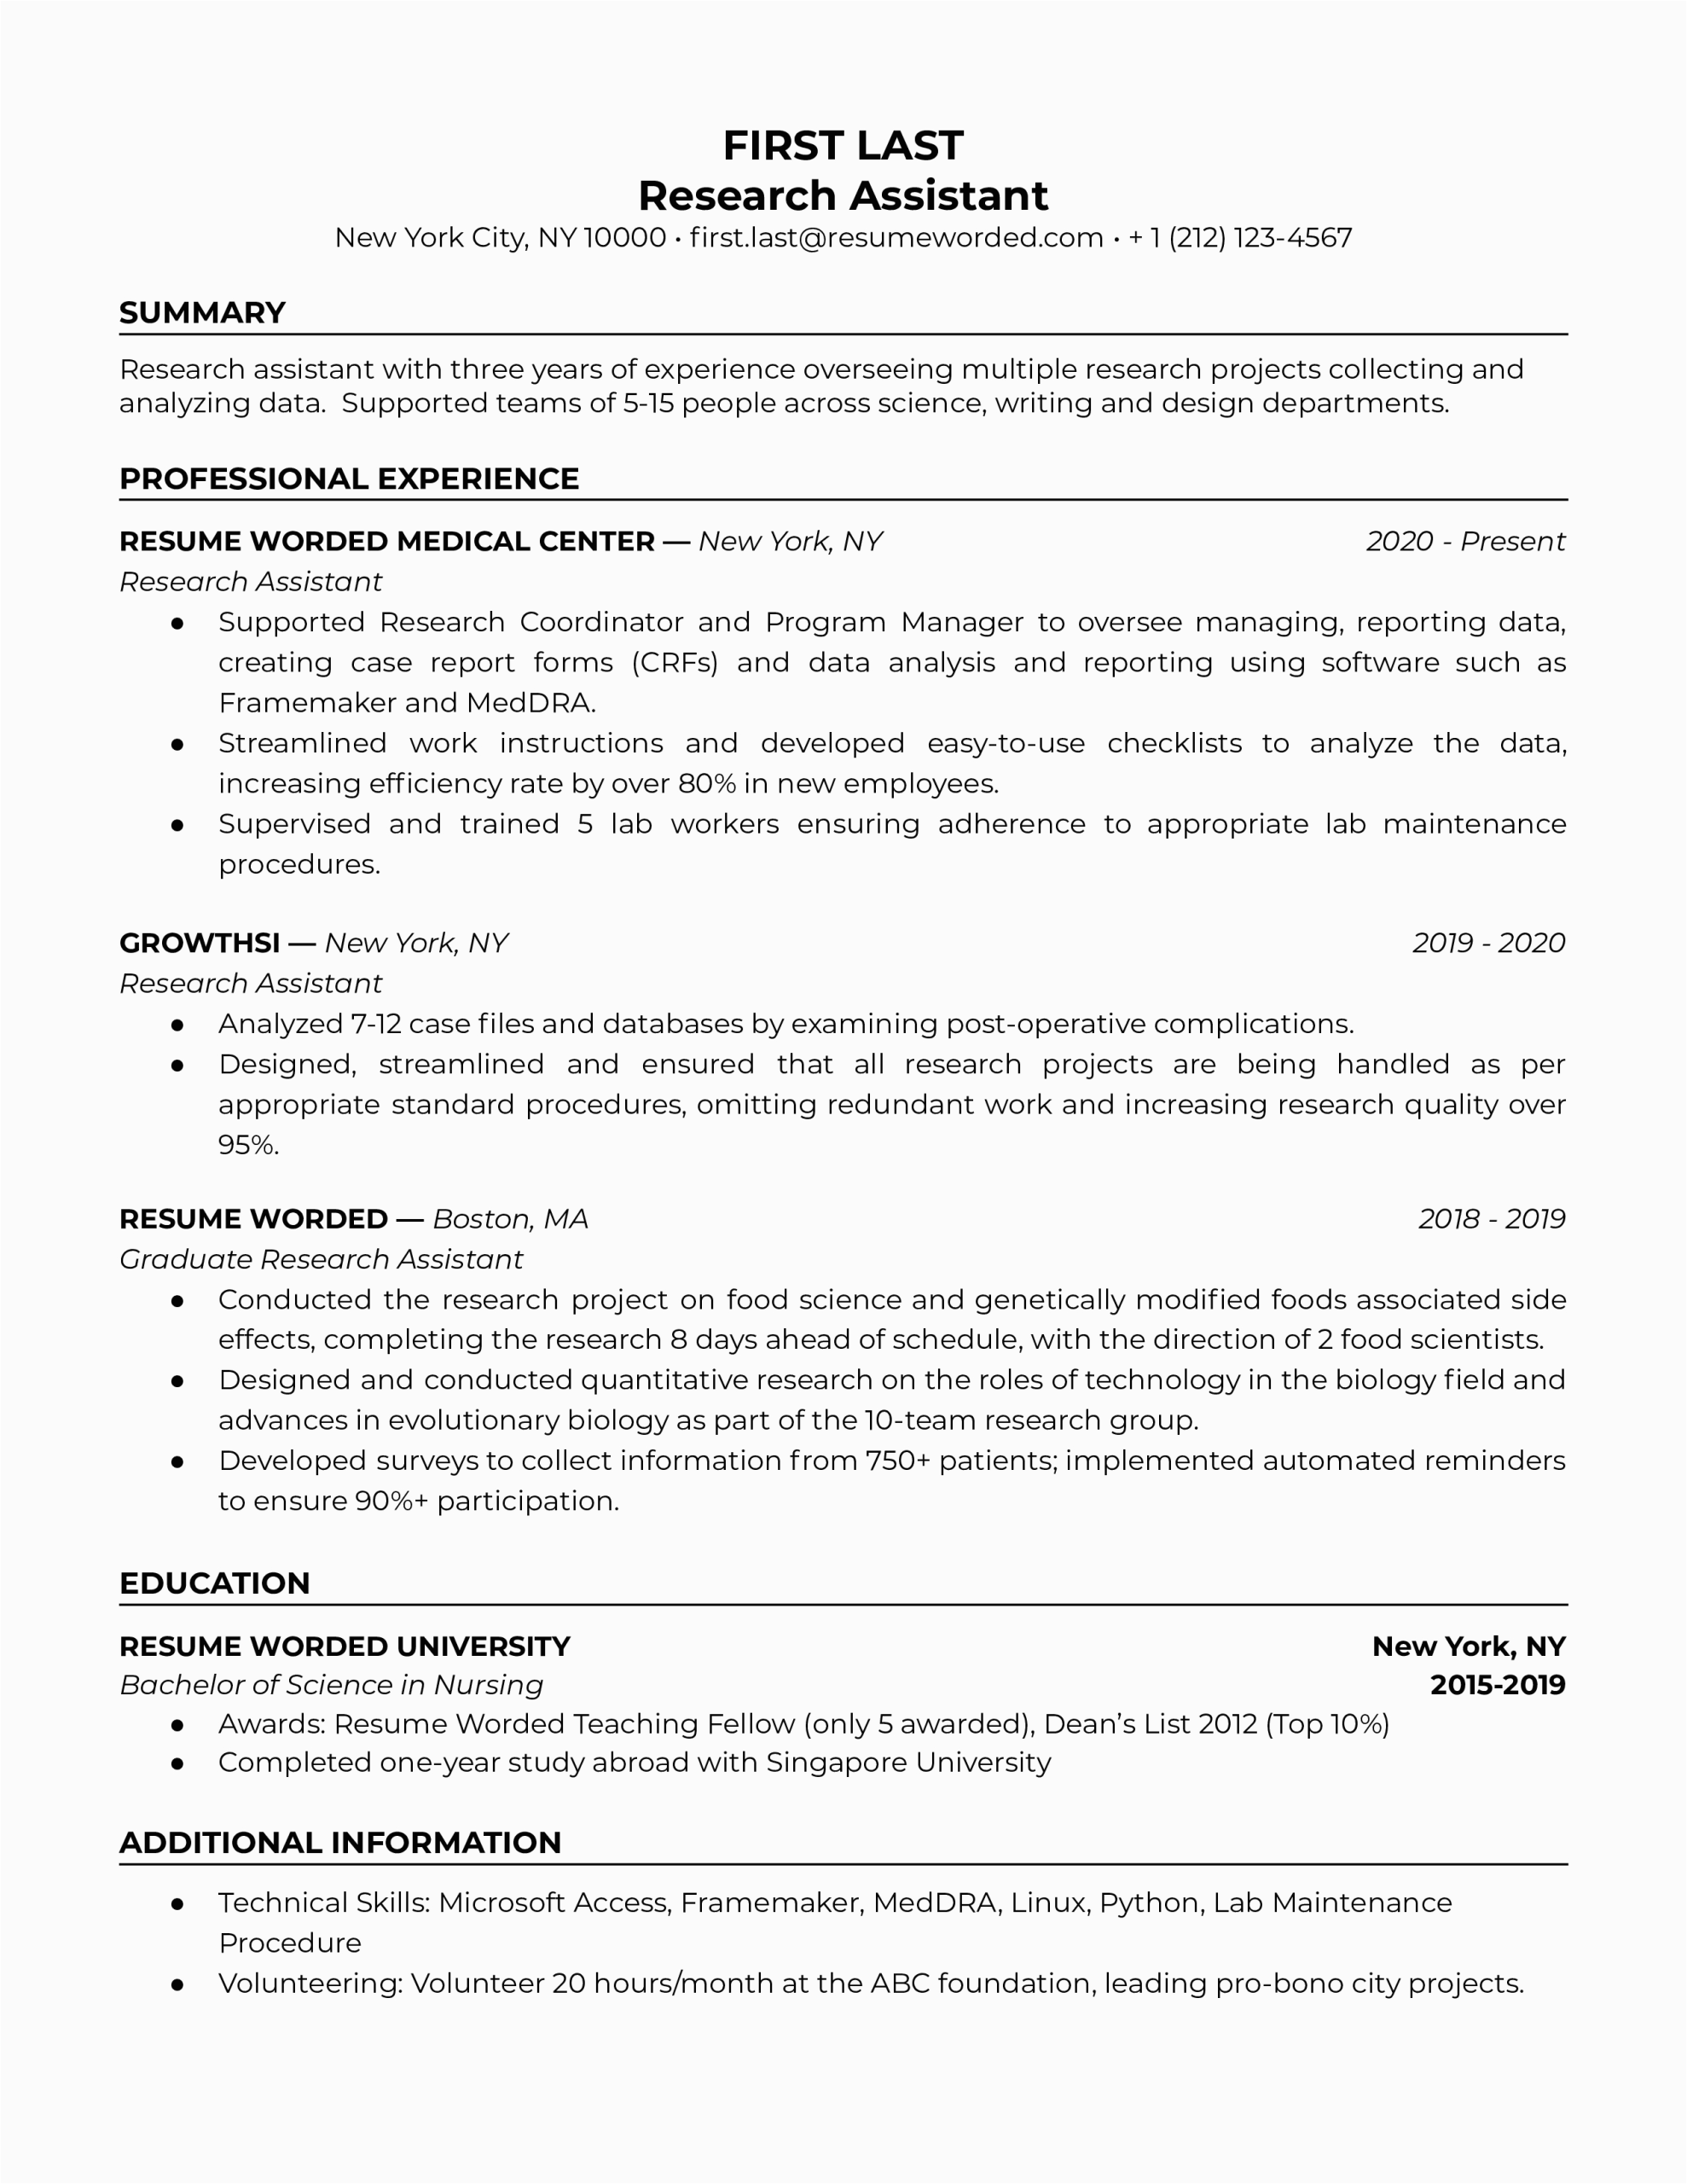 Administrative Works Research assistant Resume Sample 4 Research assistant Resume Examples for 2022